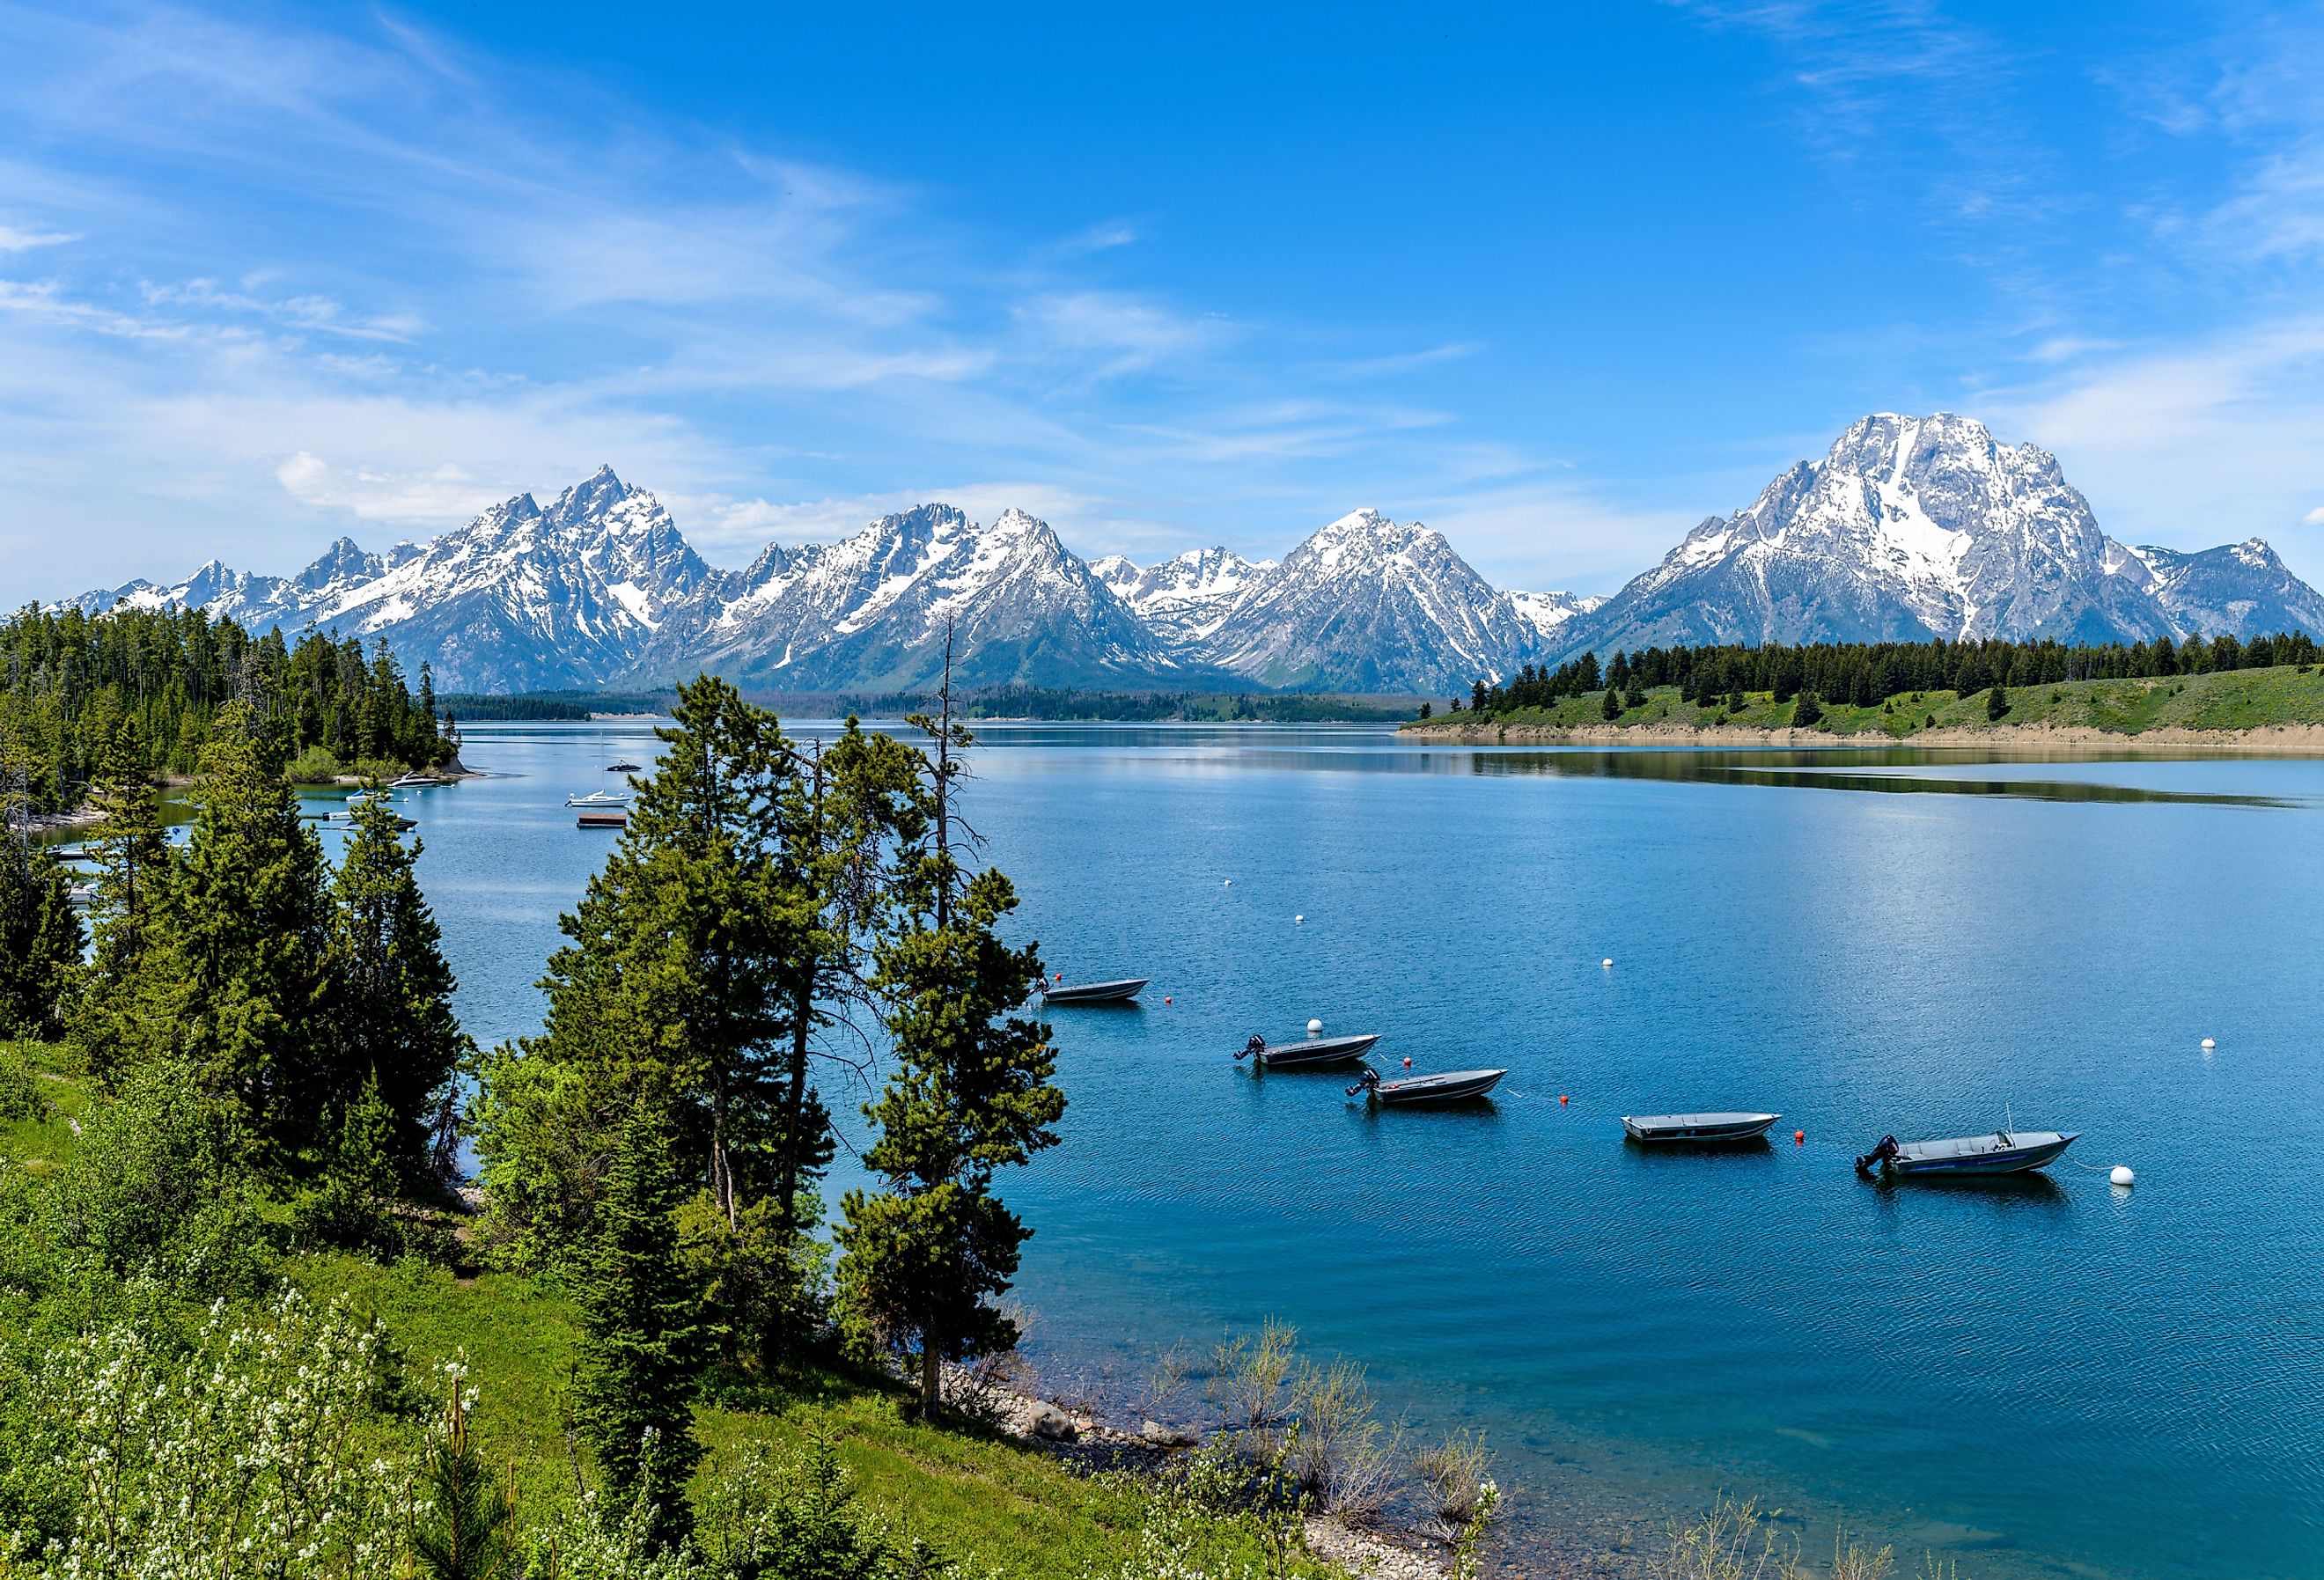 Spring view of a quiet bay of Jackson Lake, with Teton Range rising in the background, Grand Teton National Park, Wyoming.